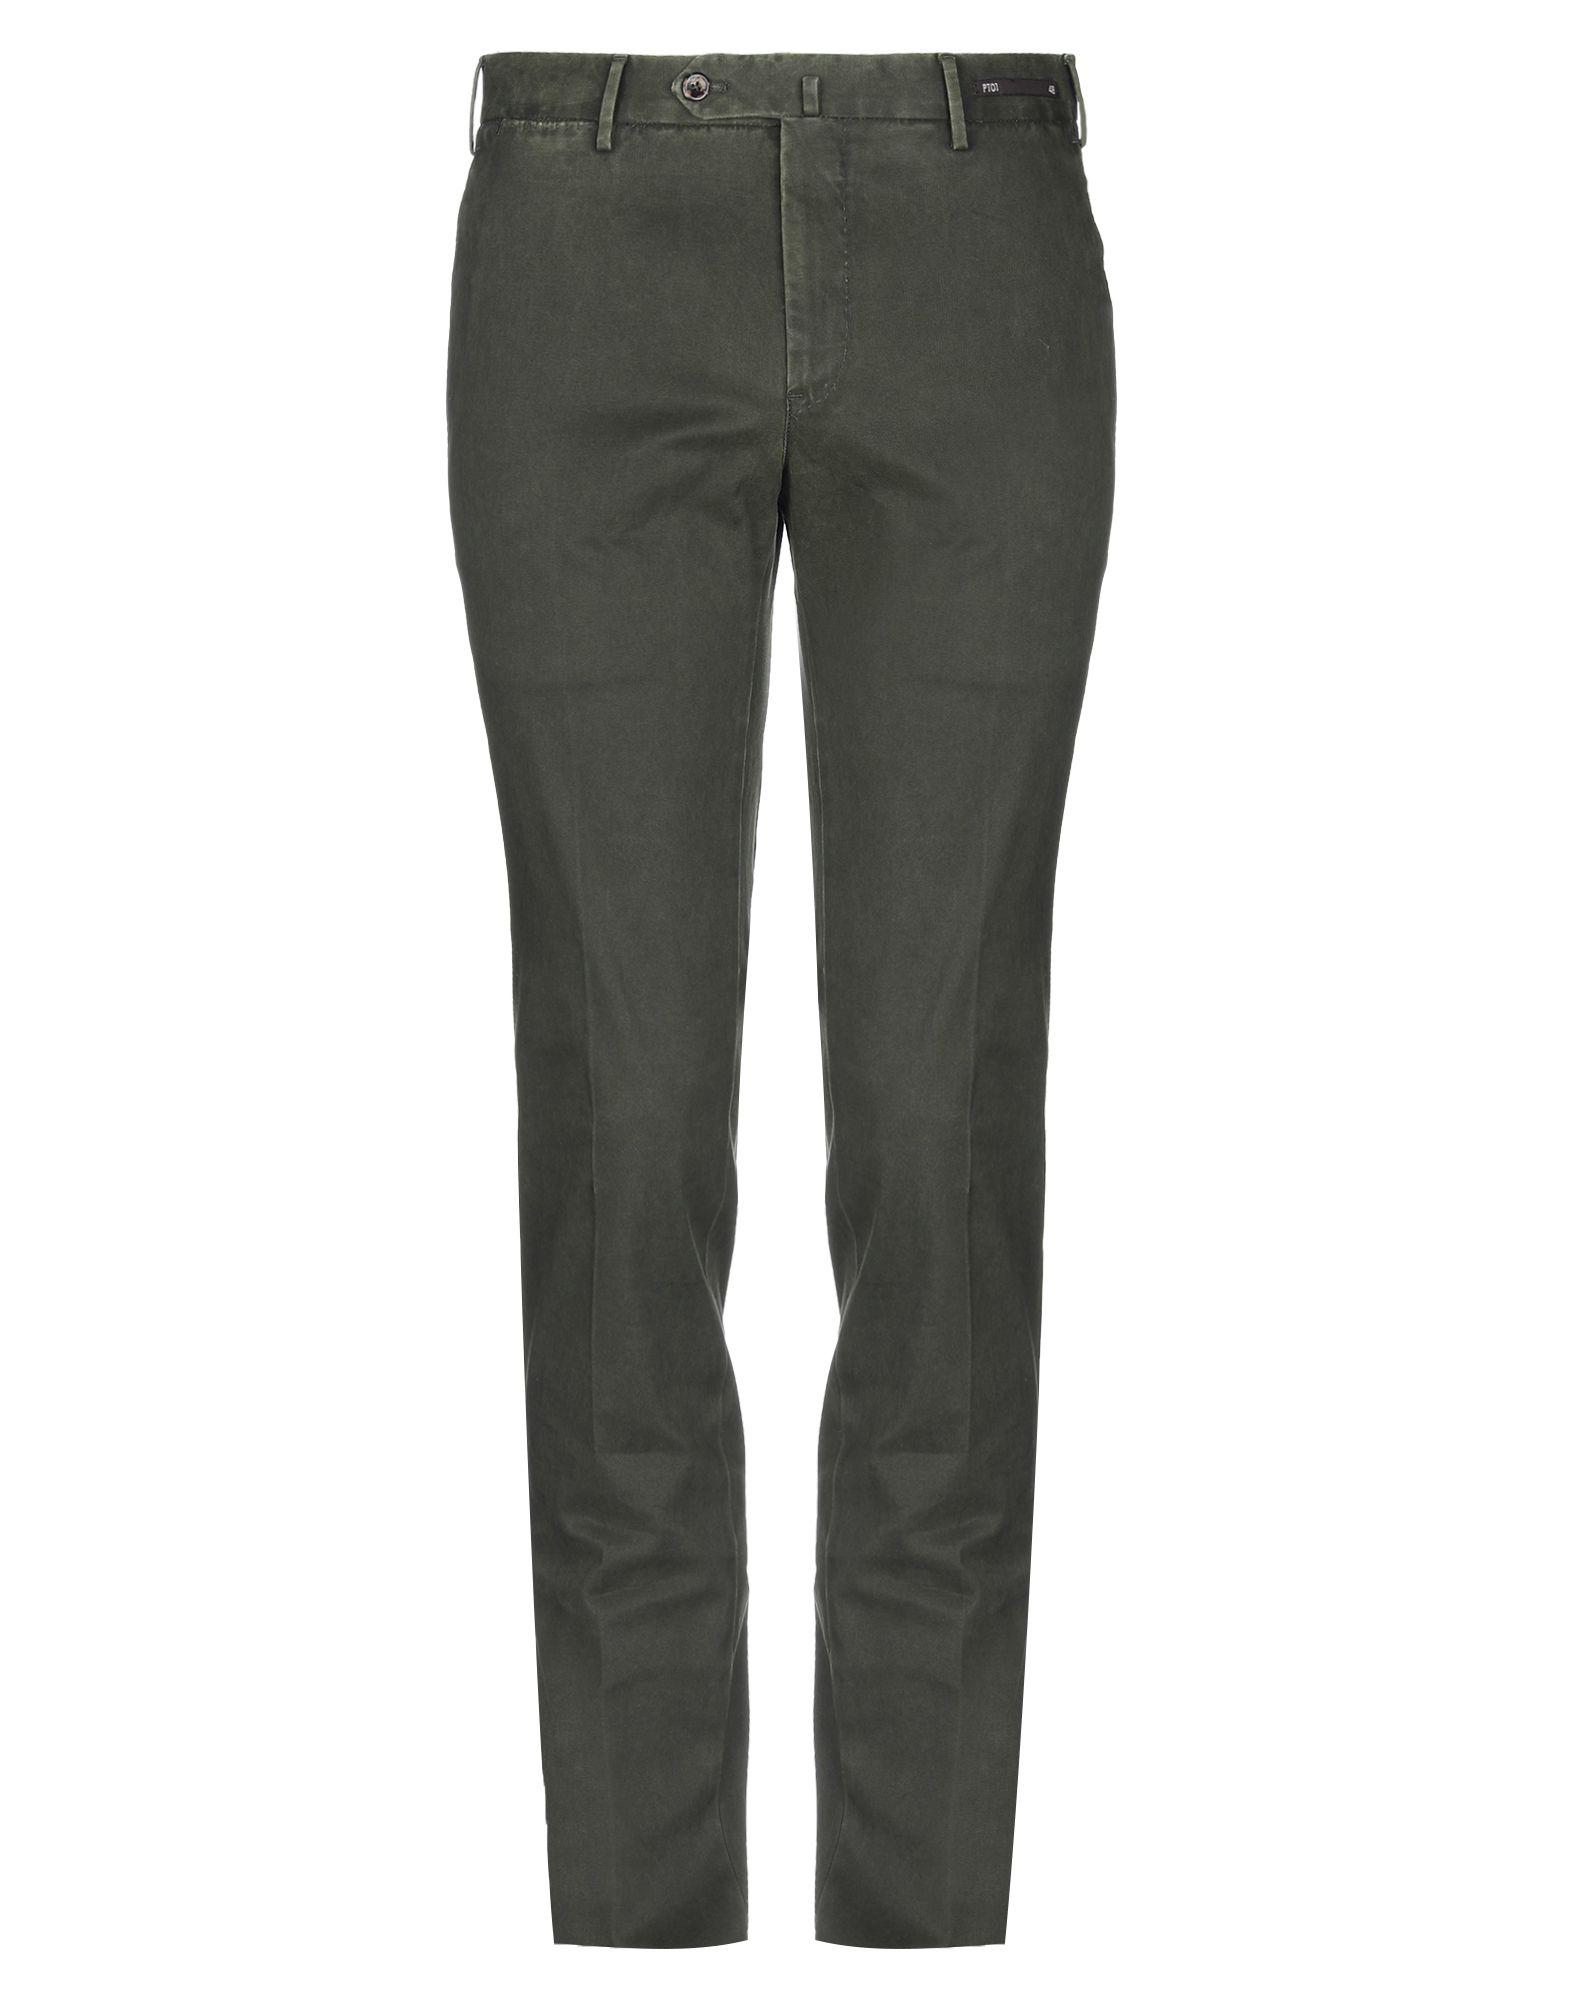 PT01 Cotton Casual Pants in Dark Green (Green) for Men - Lyst